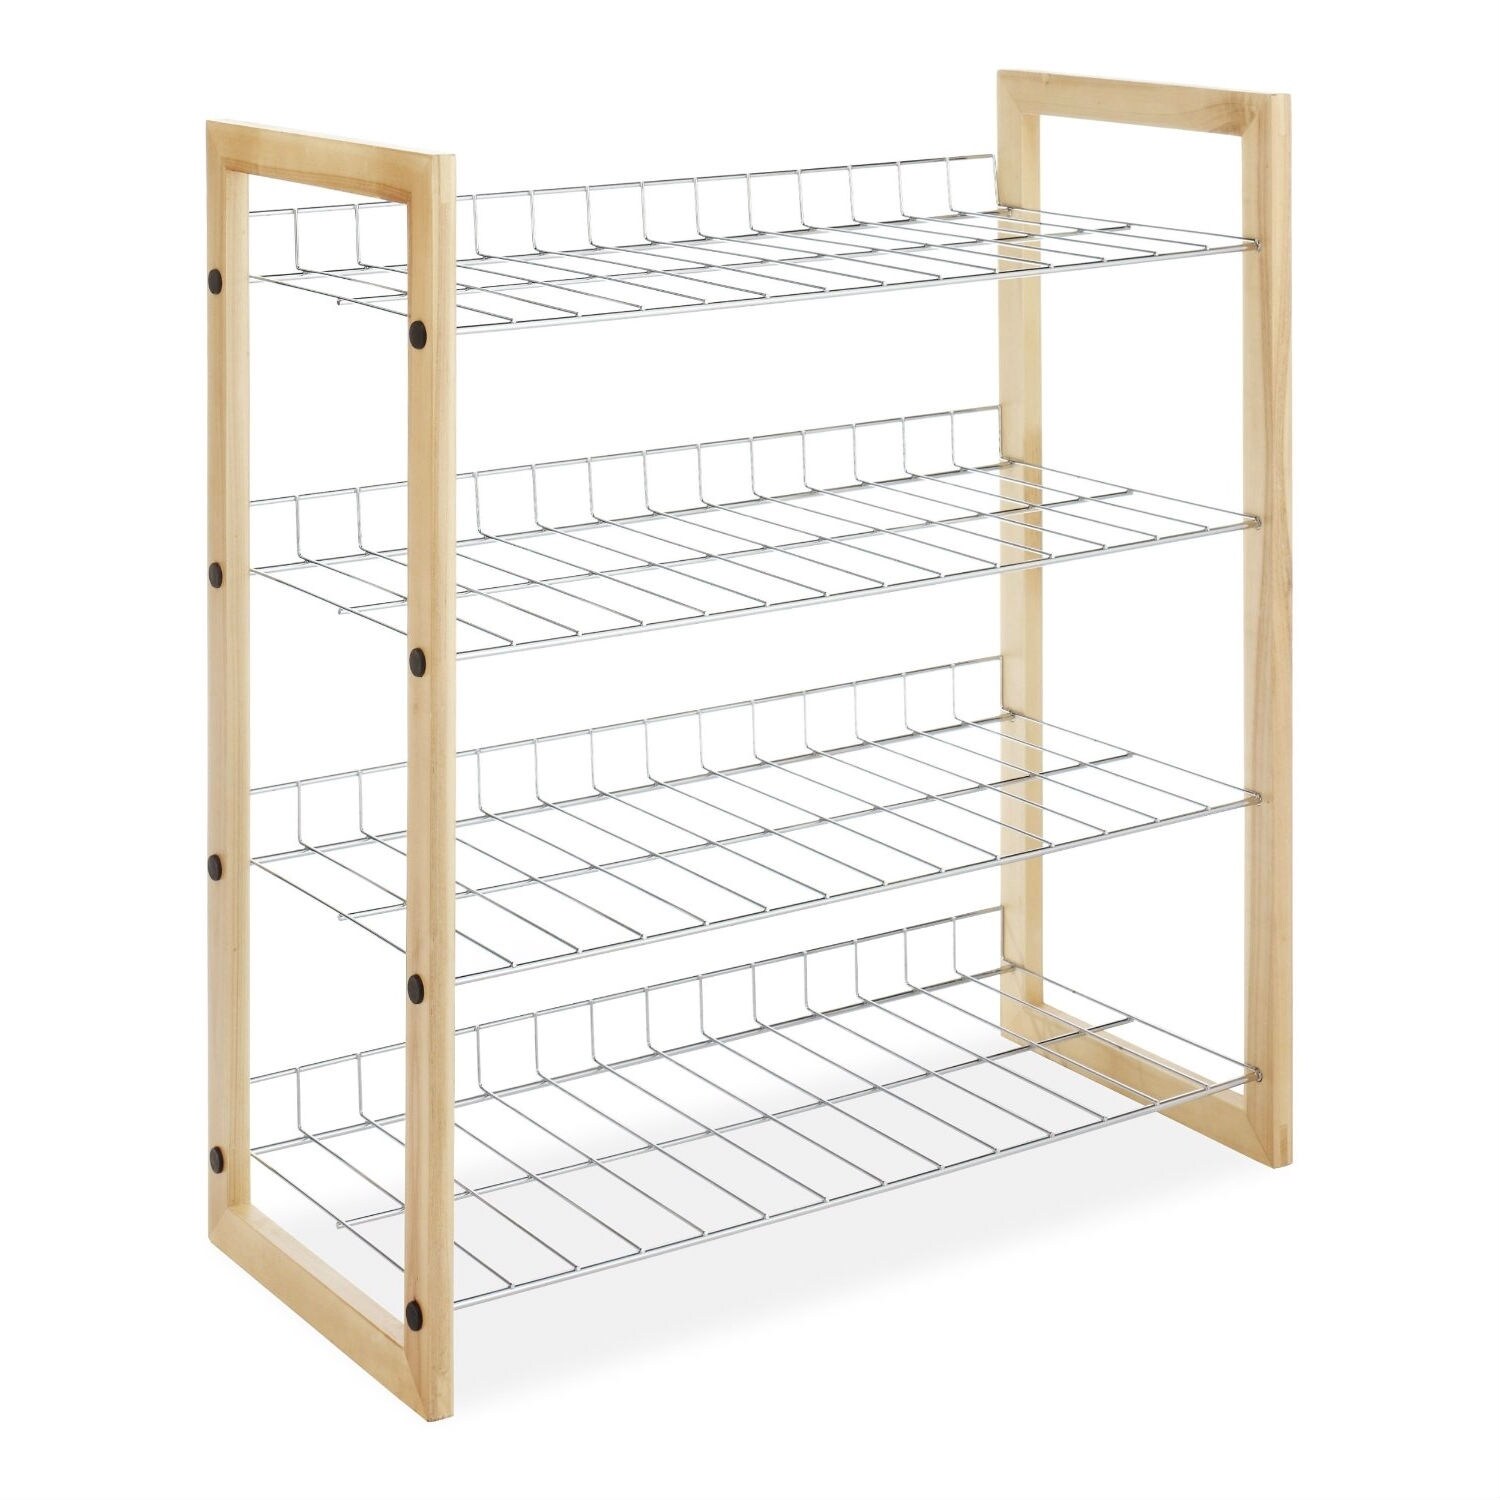 Shop Black Friday Deals On 4 Shelf Closet Shoe Rack With Natural Wood Frame And Chrome Wire Shelves Overstock 29063668